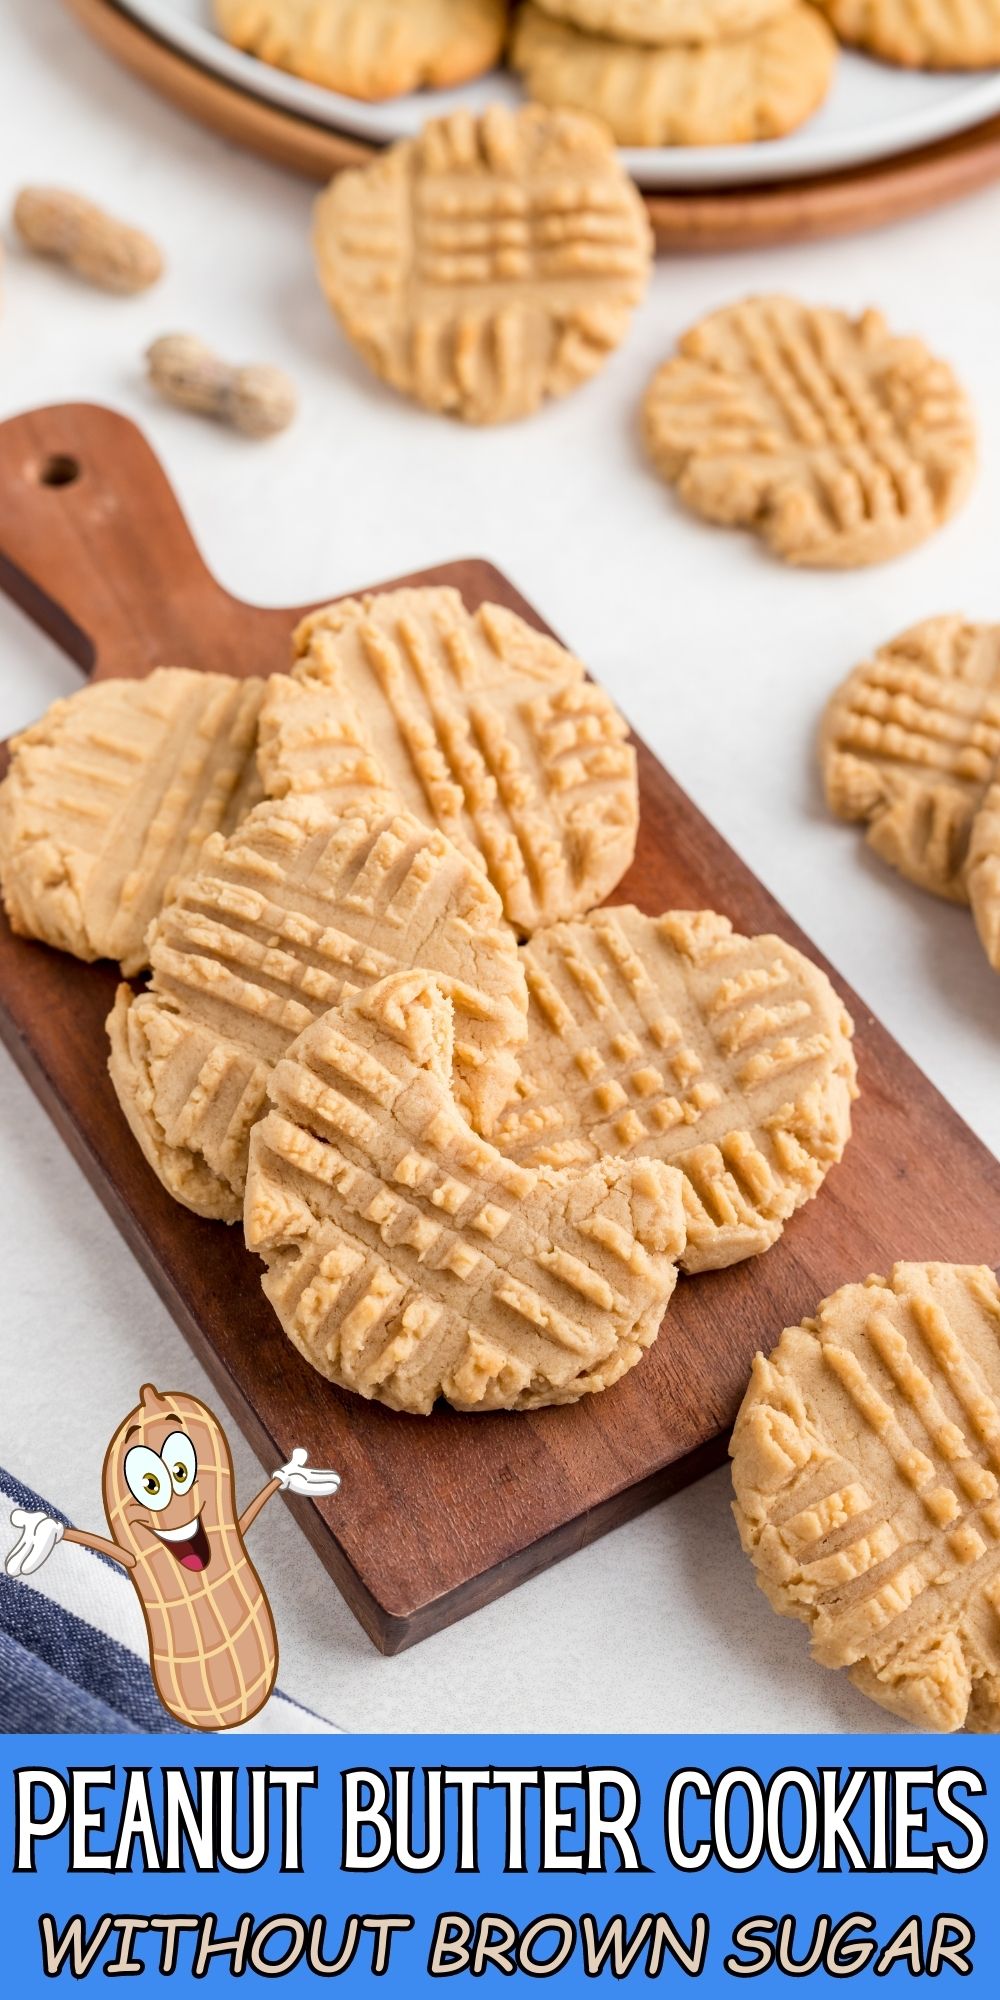 Enjoy delicious peanut butter cookies without brown sugar, made with a combination of peanut butter, sweet maple syrup, and vanilla!